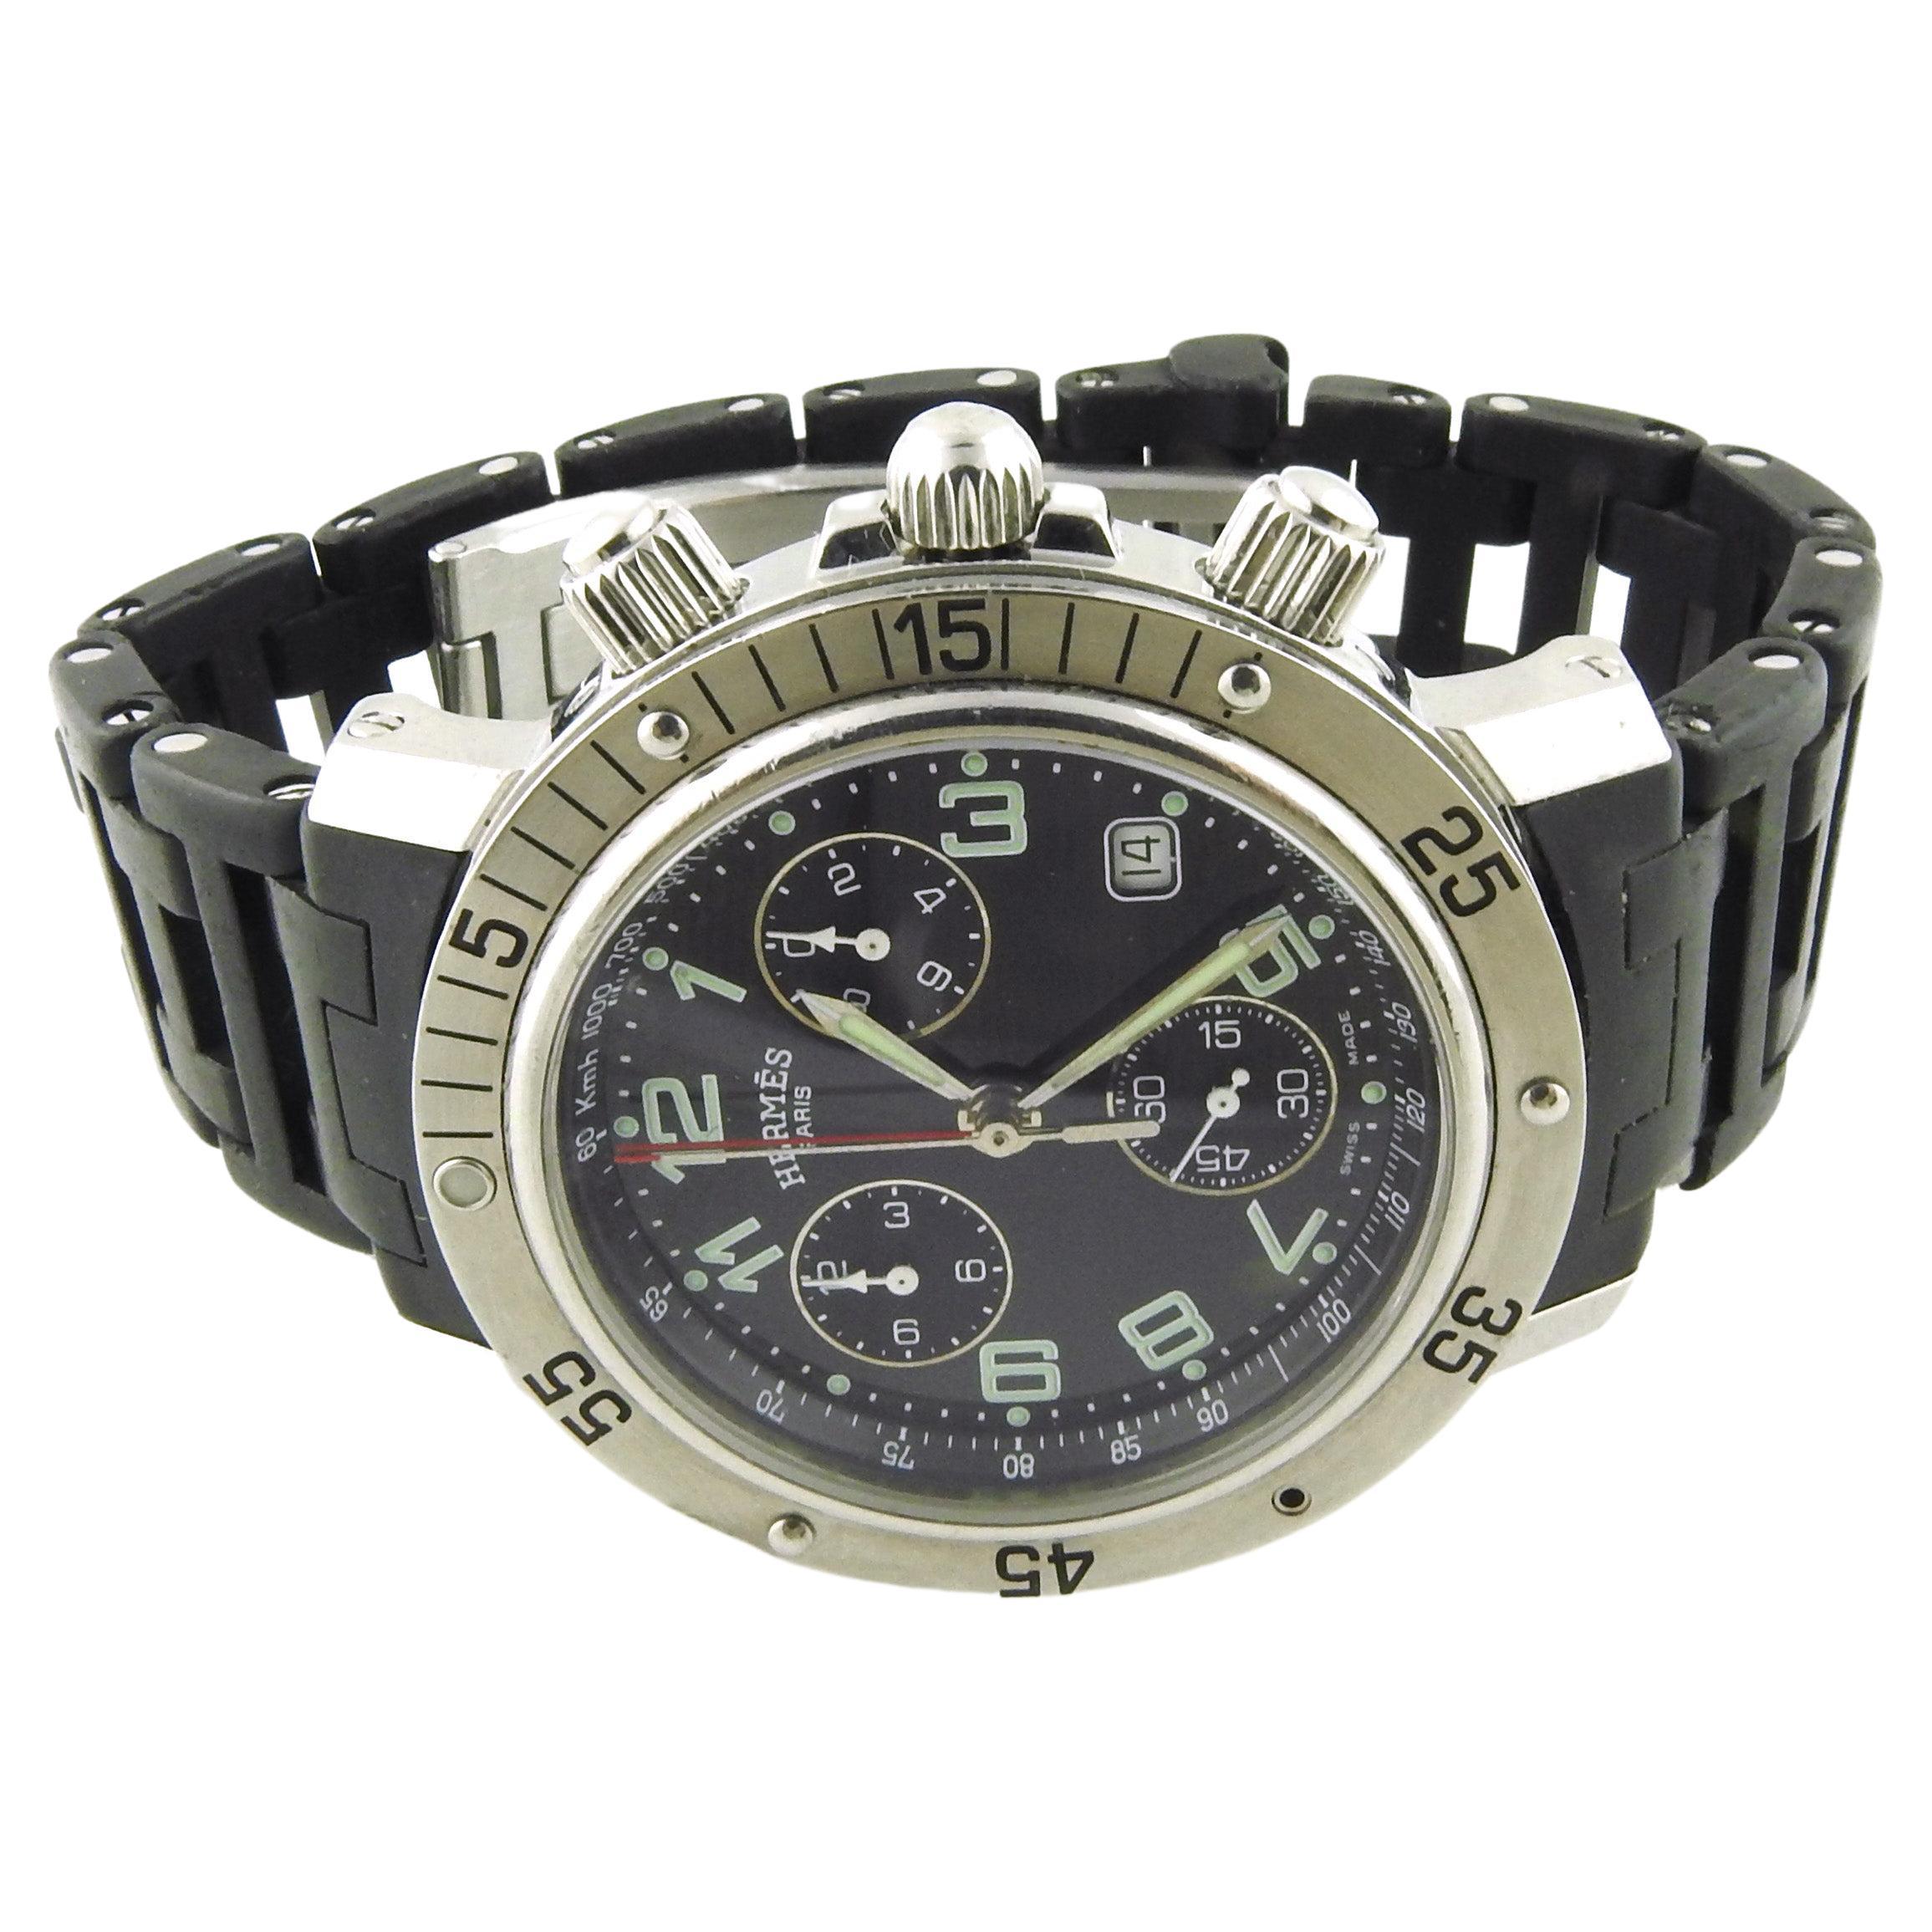 Hermes Clipper Diver's Watch CL2 915 Chronograph Stainless Steel Rubber Unisex